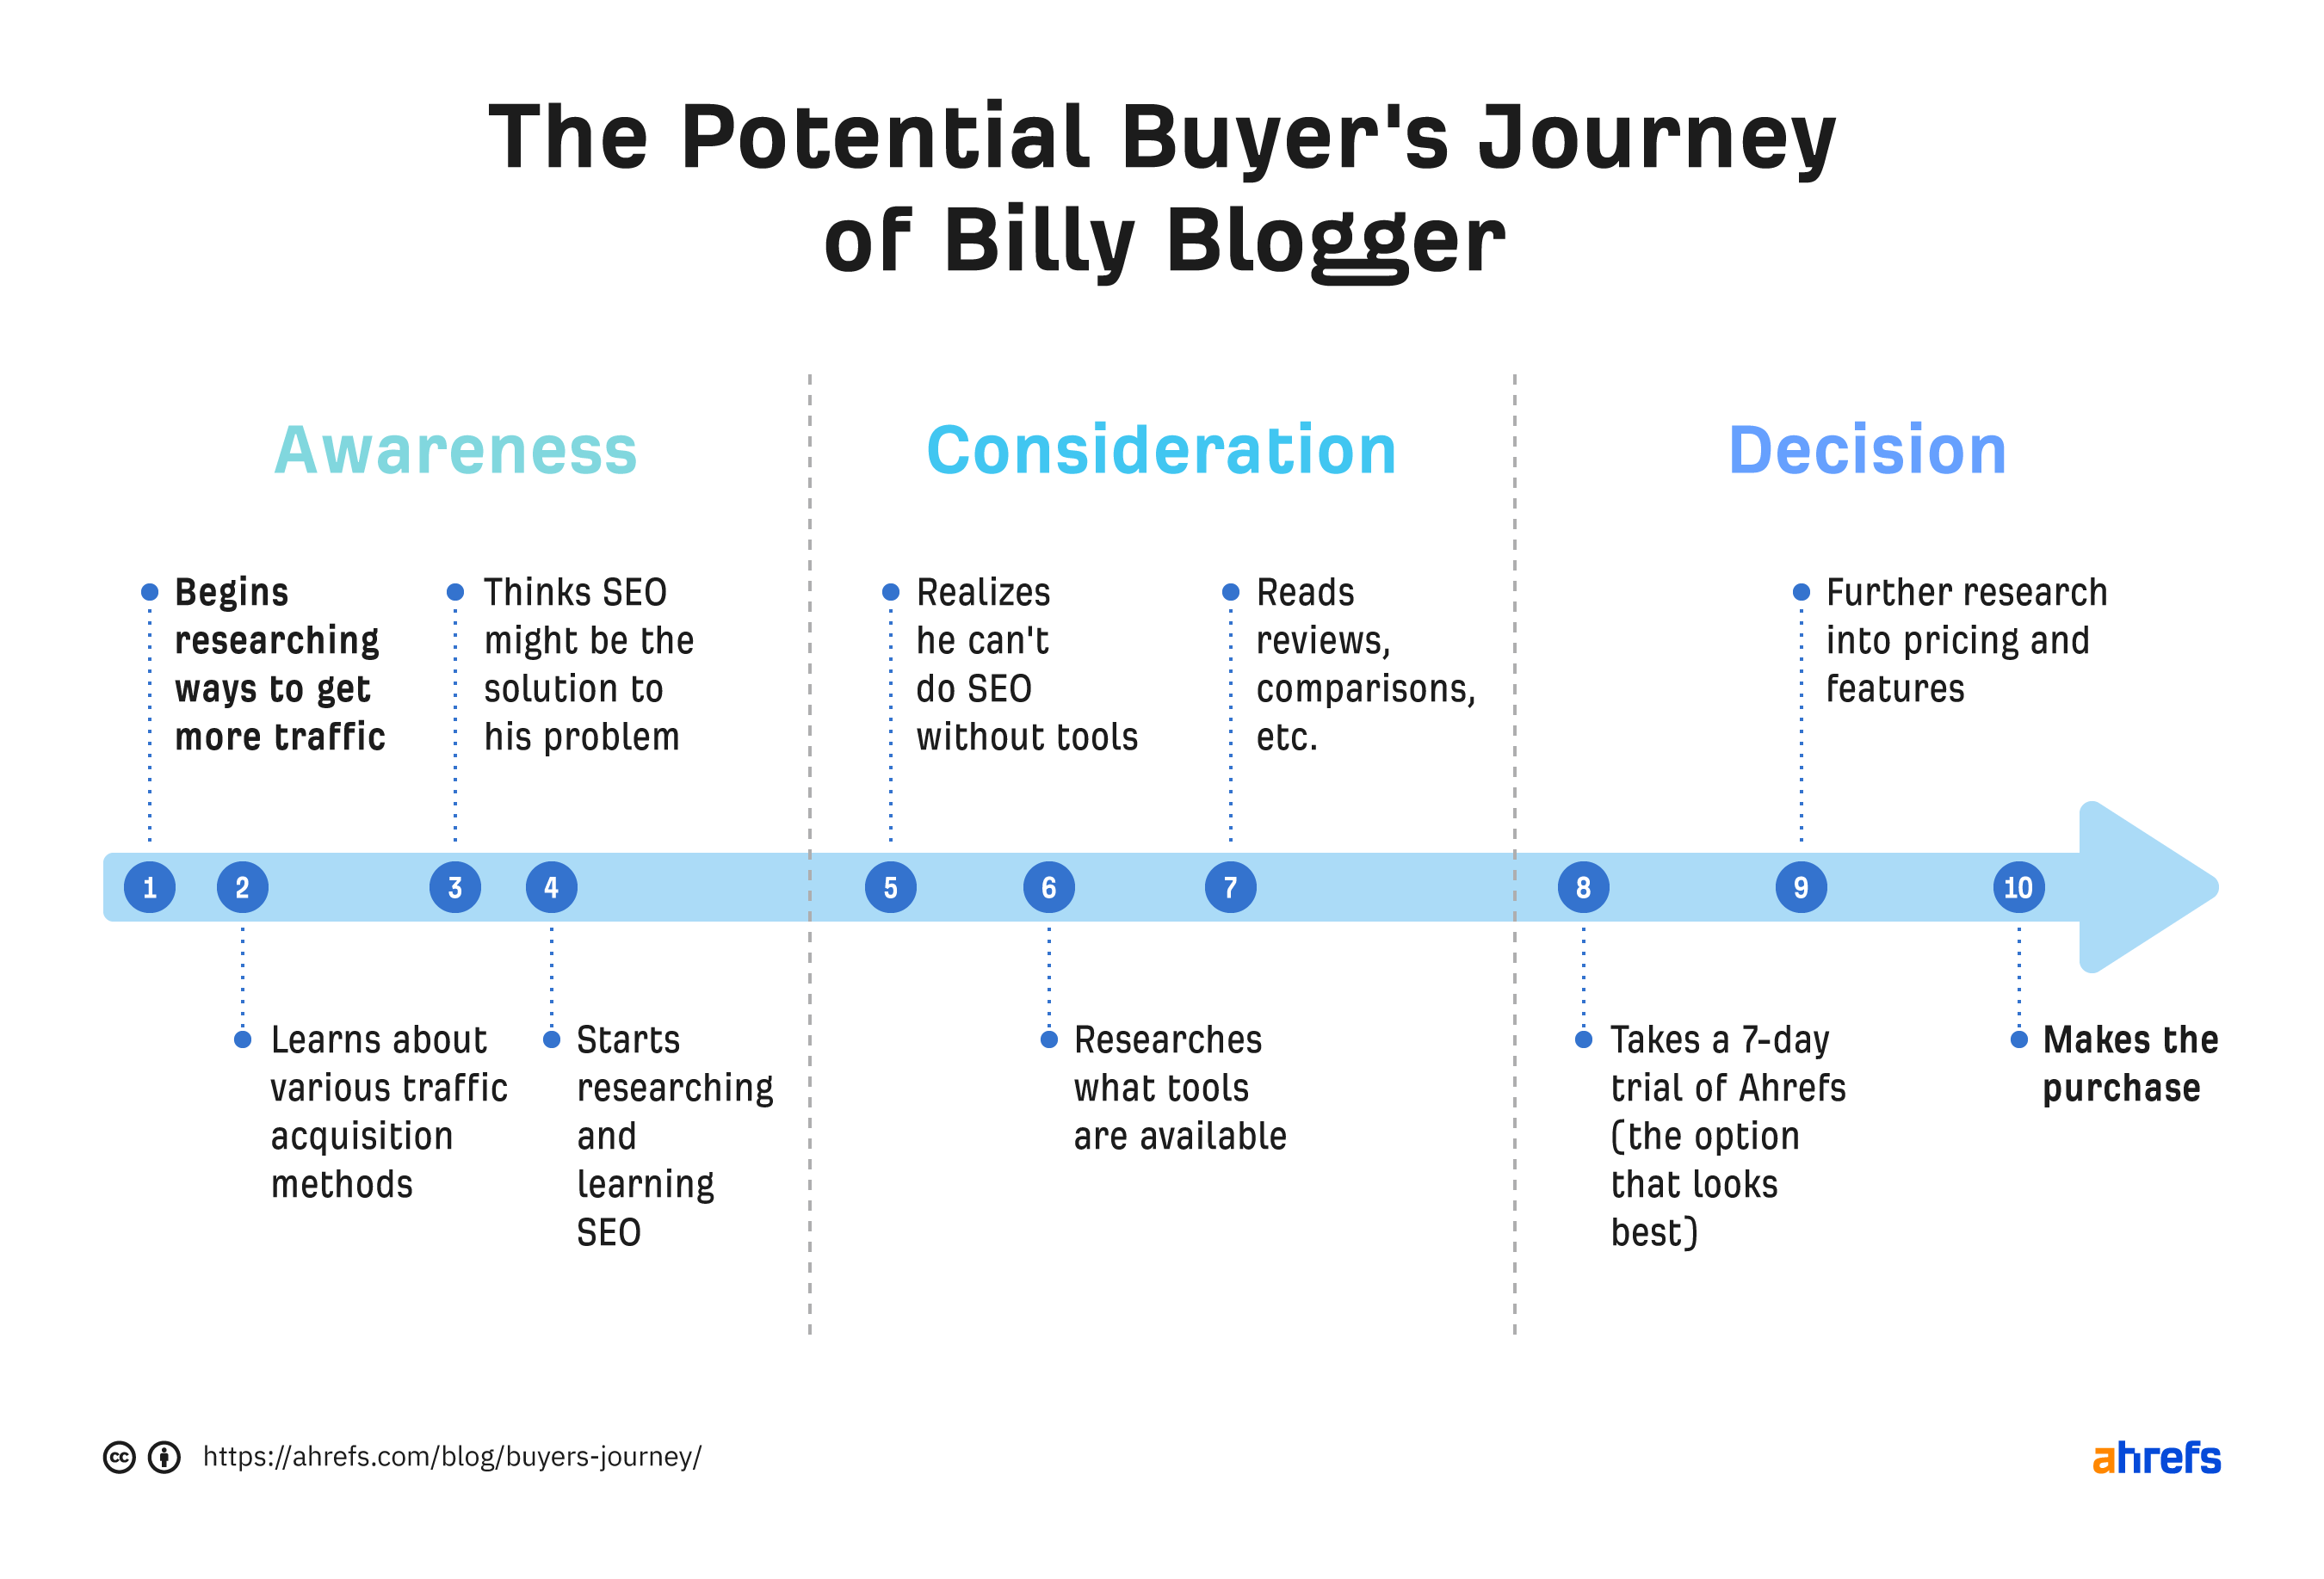 Timeline showing potential buyer's journey of Billy. Based on the 3 aforementioned stages 